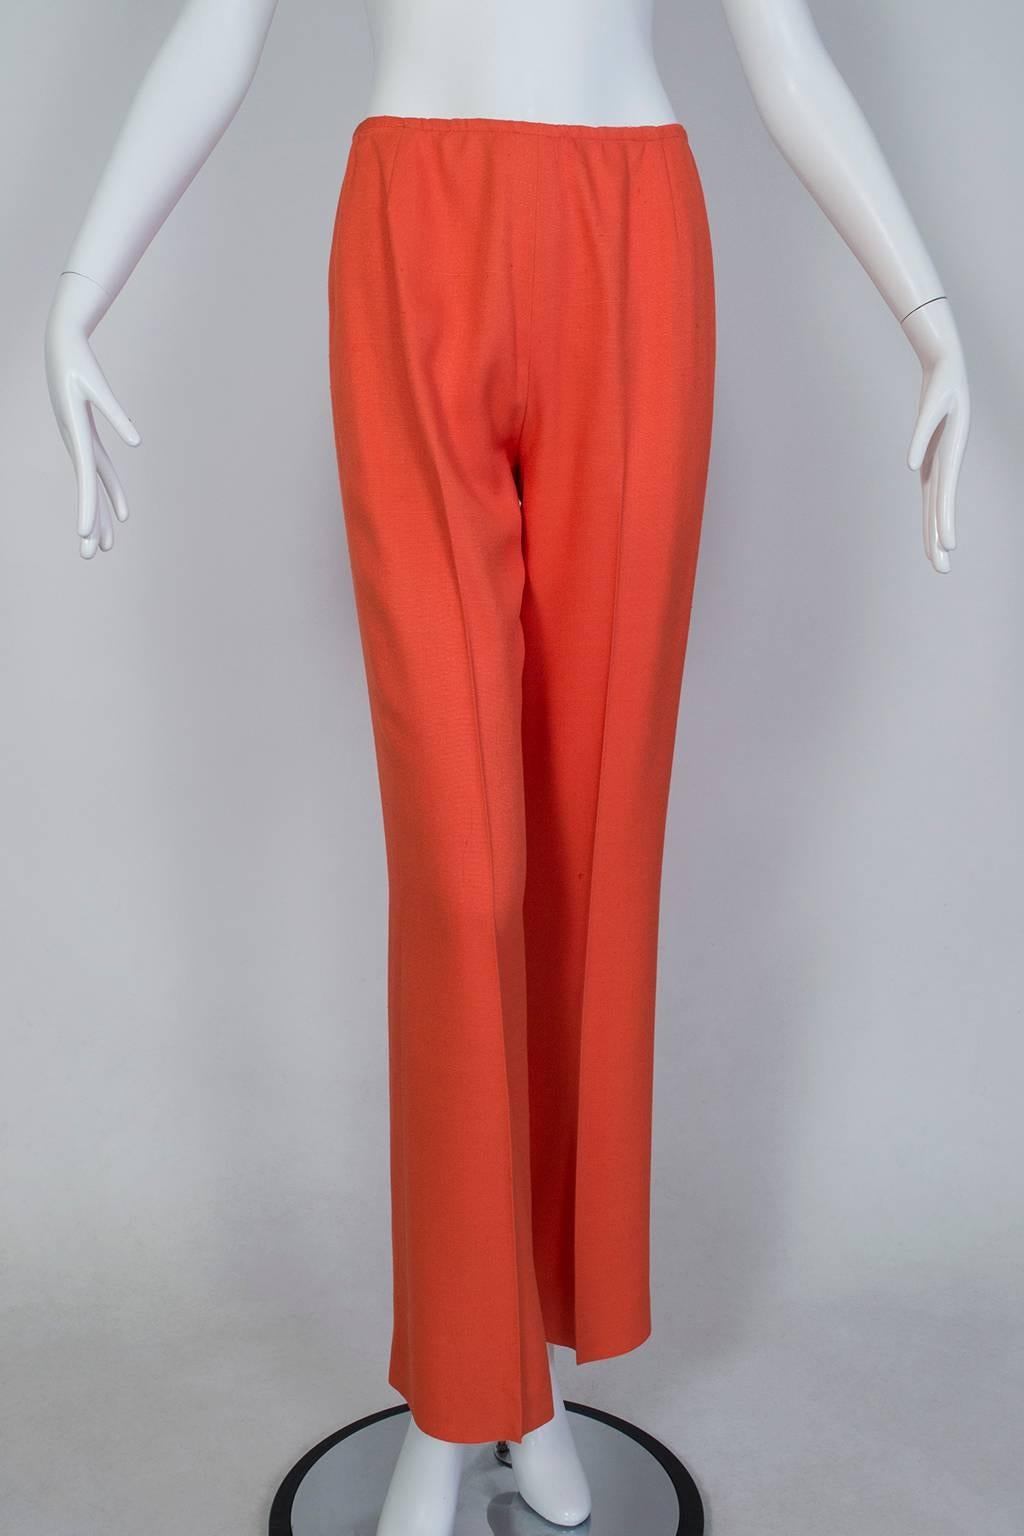 Documented Pierre Cardin Plunging Hostess Dress and Skinny Pants - XS-S, 1970 For Sale 6